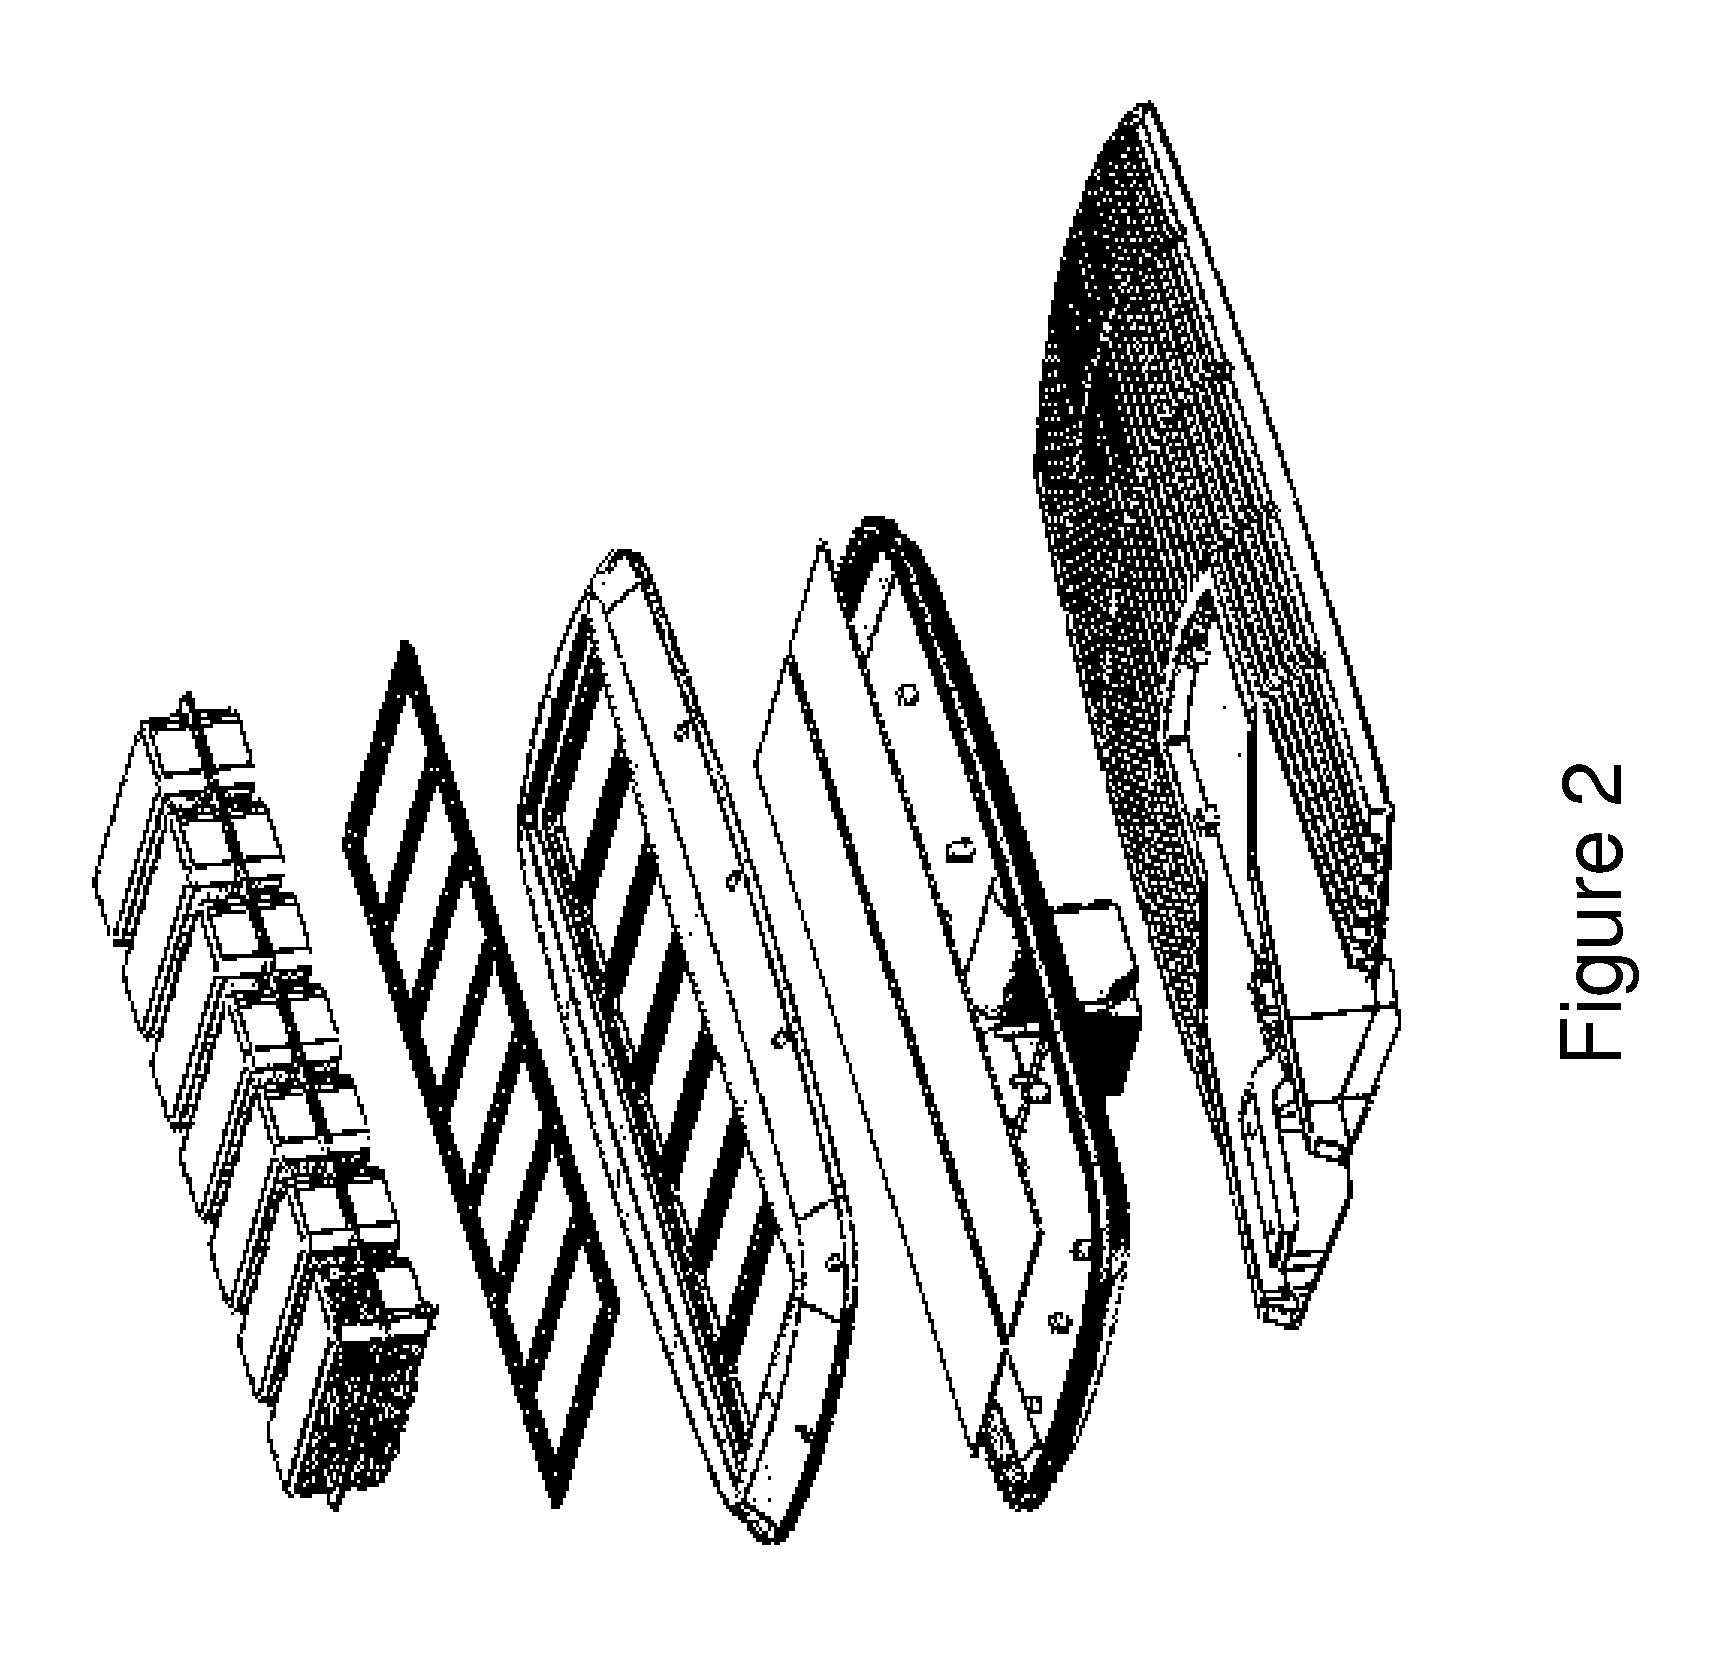 Systems and methods for modular and configurable driver system for LED lighting devices